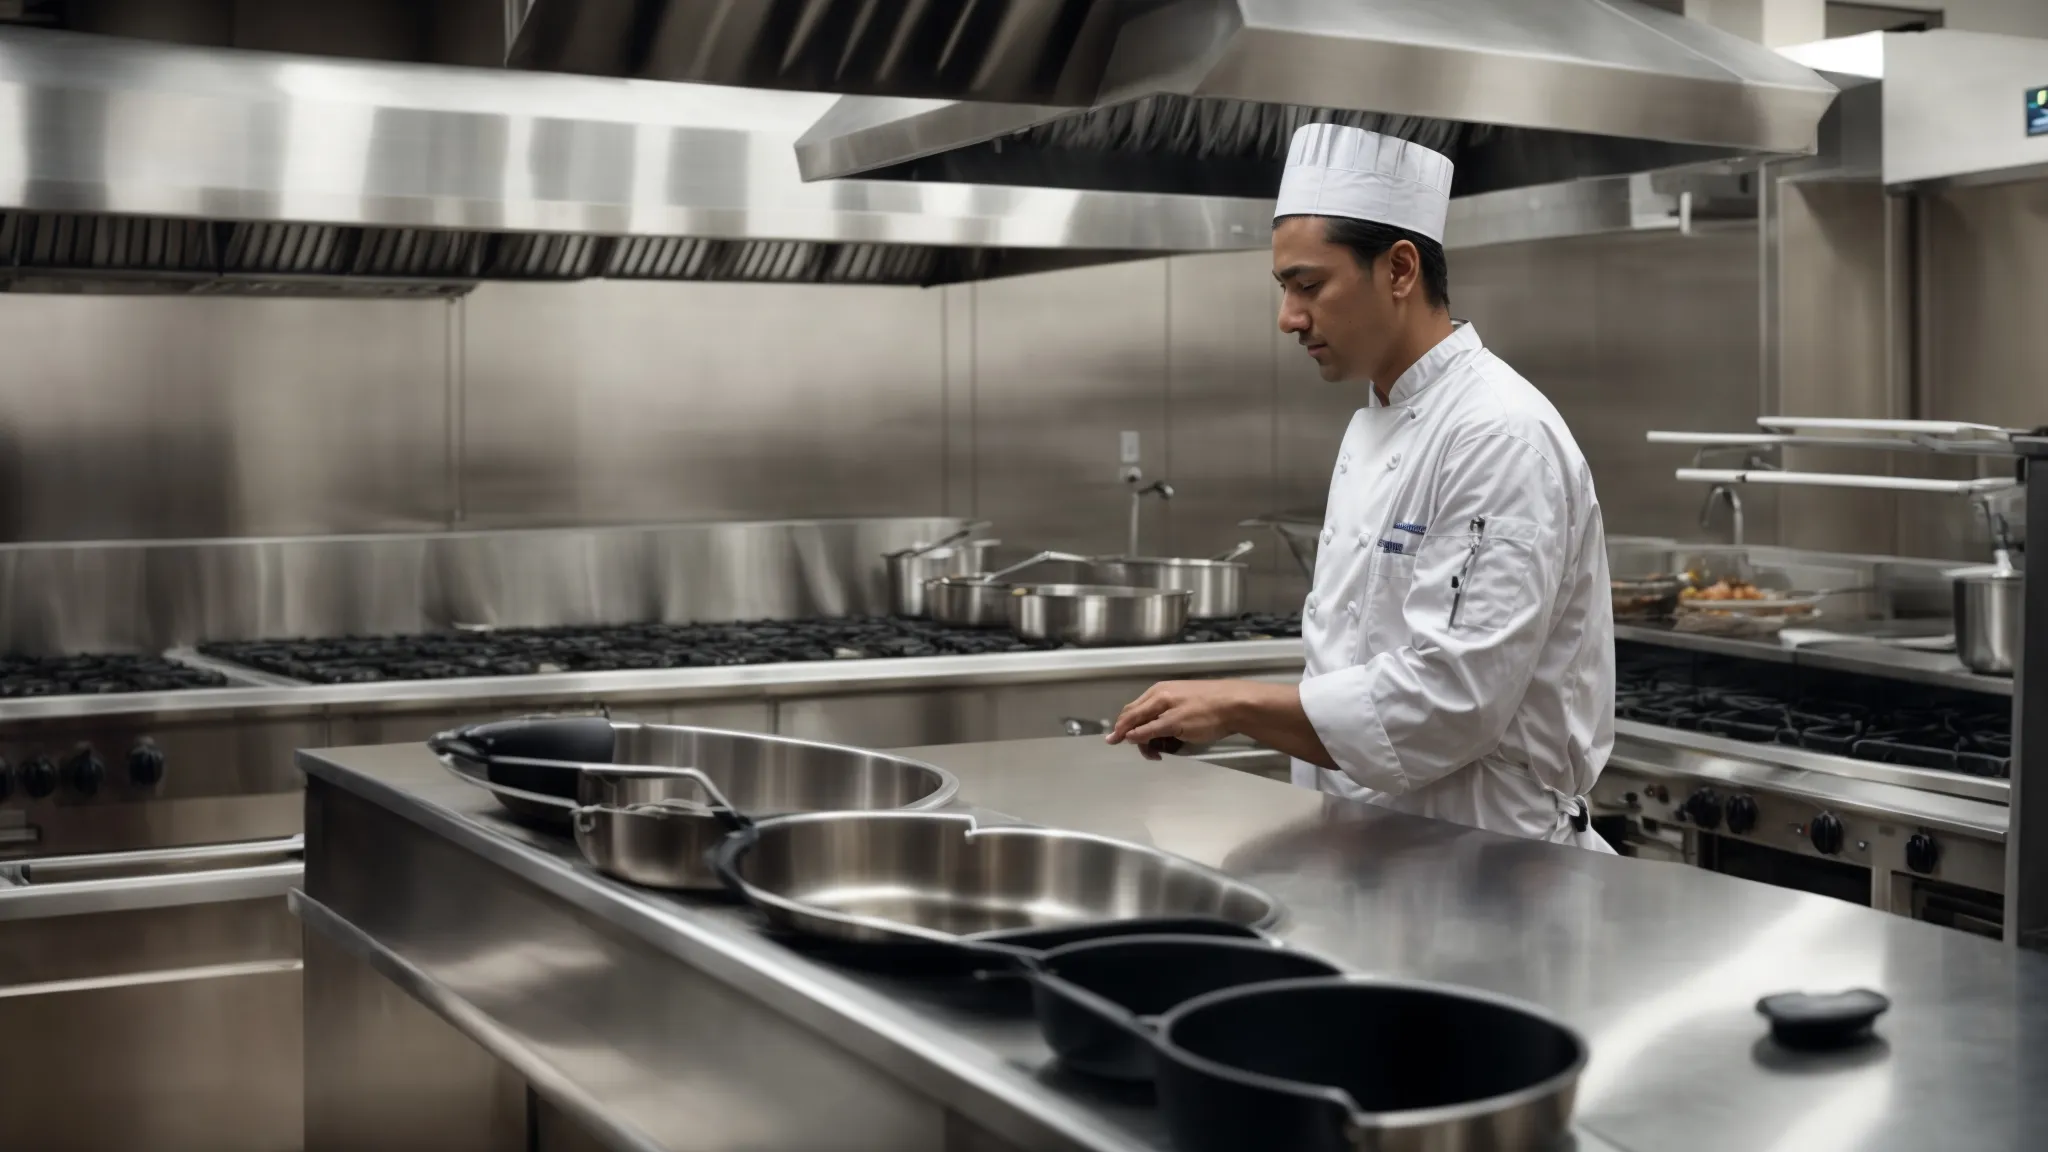 a professional chef inspects a clean, well-organized commercial kitchen with stainless steel appliances and a functioning exhaust hood.